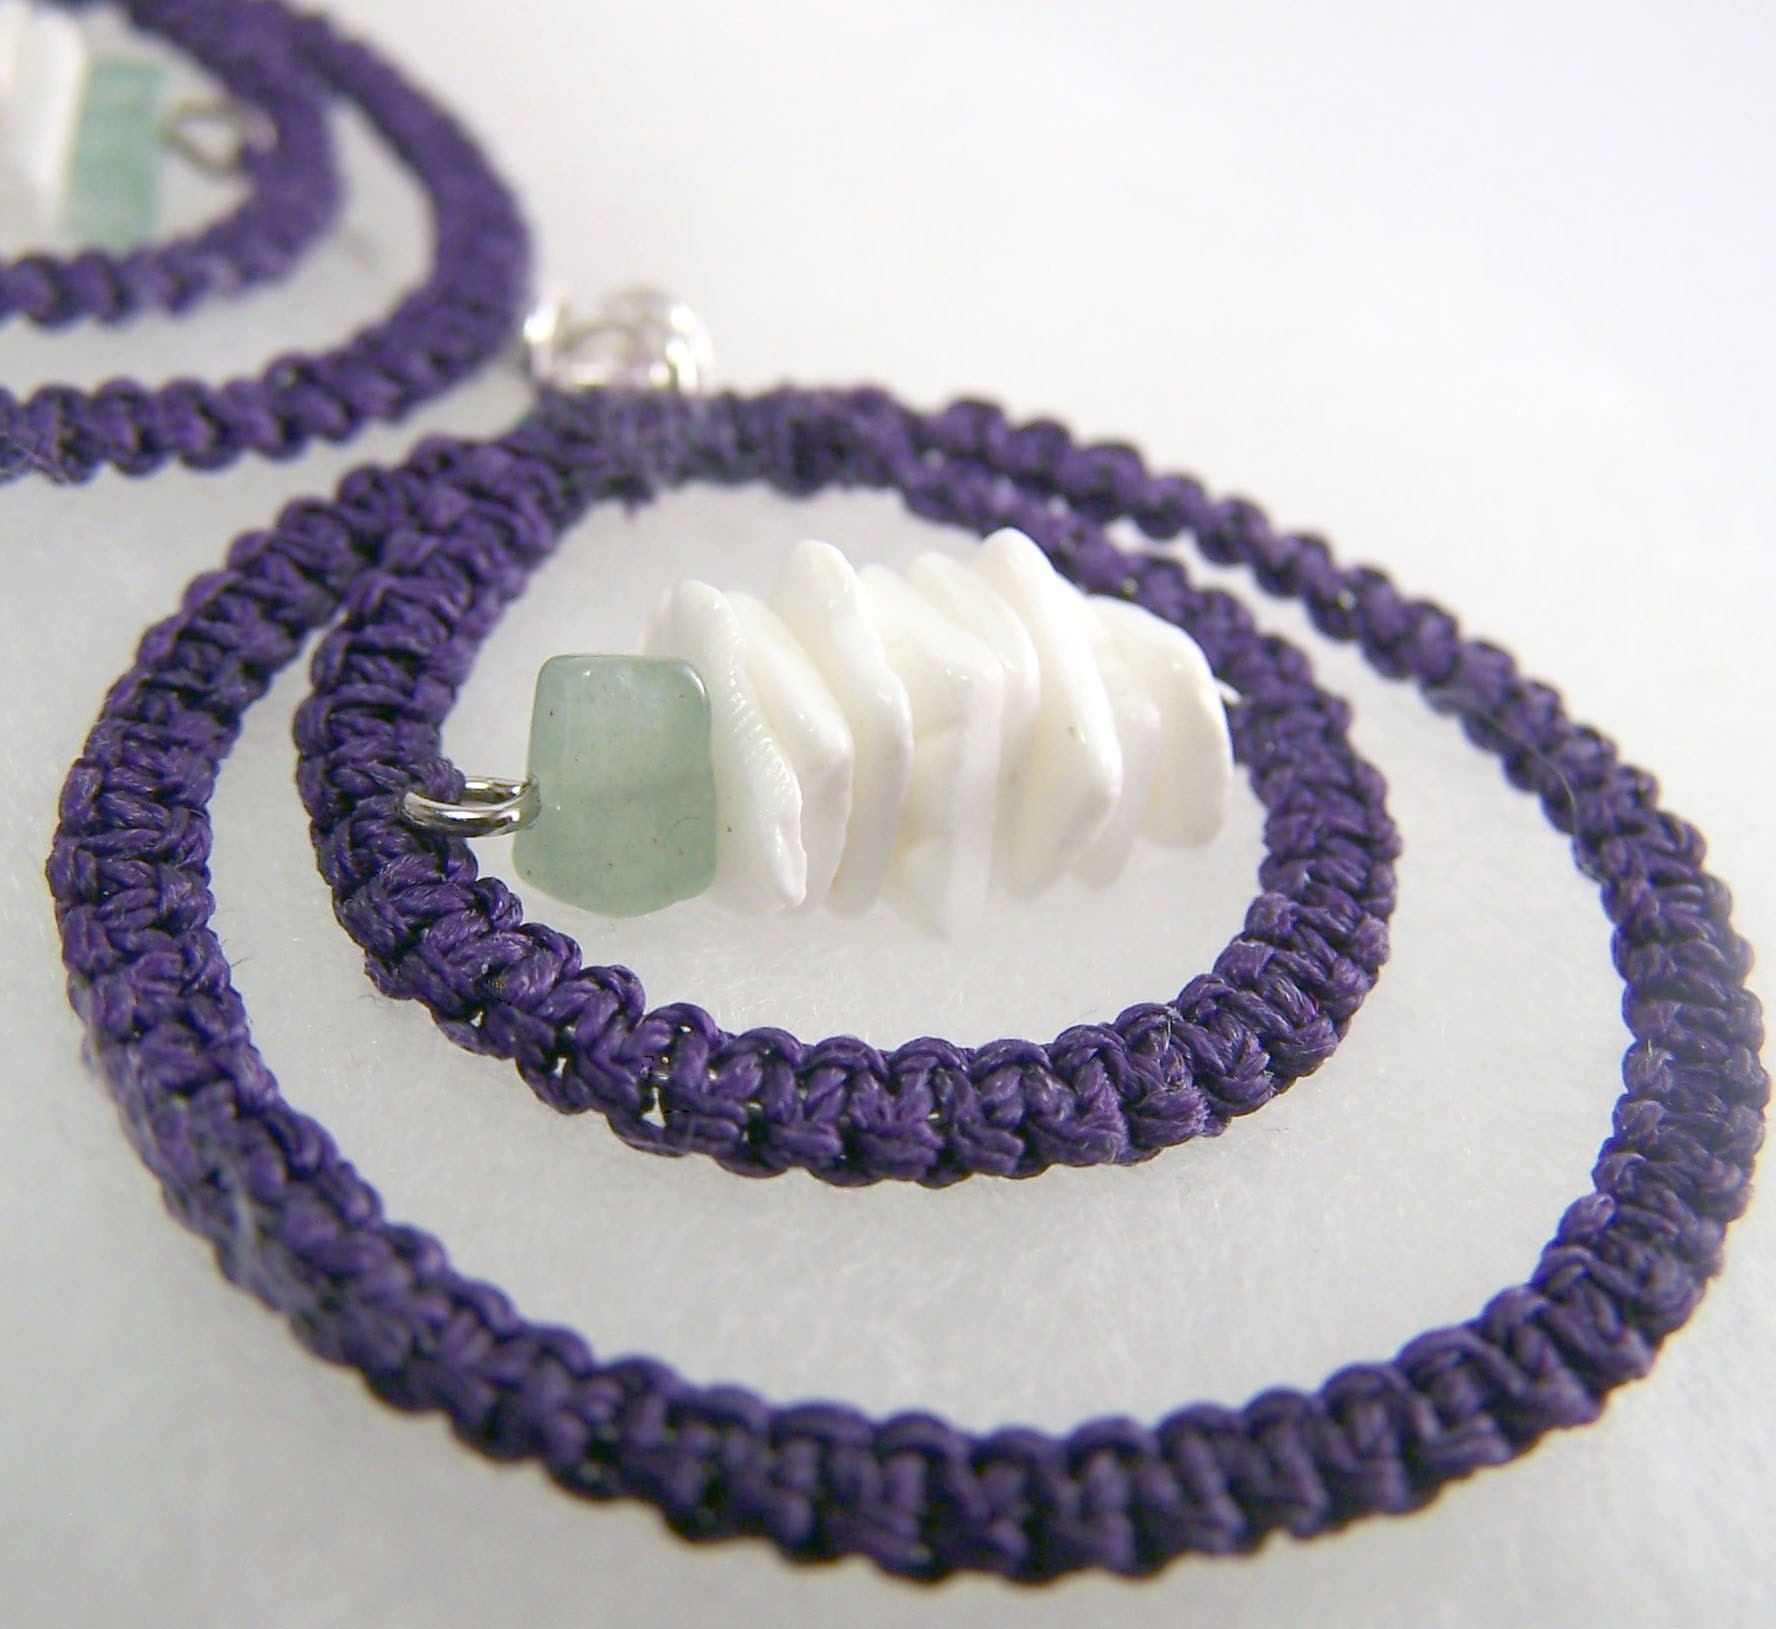 Tangent in Purple- Macrame Earrings with Shell and Aventurine Accents